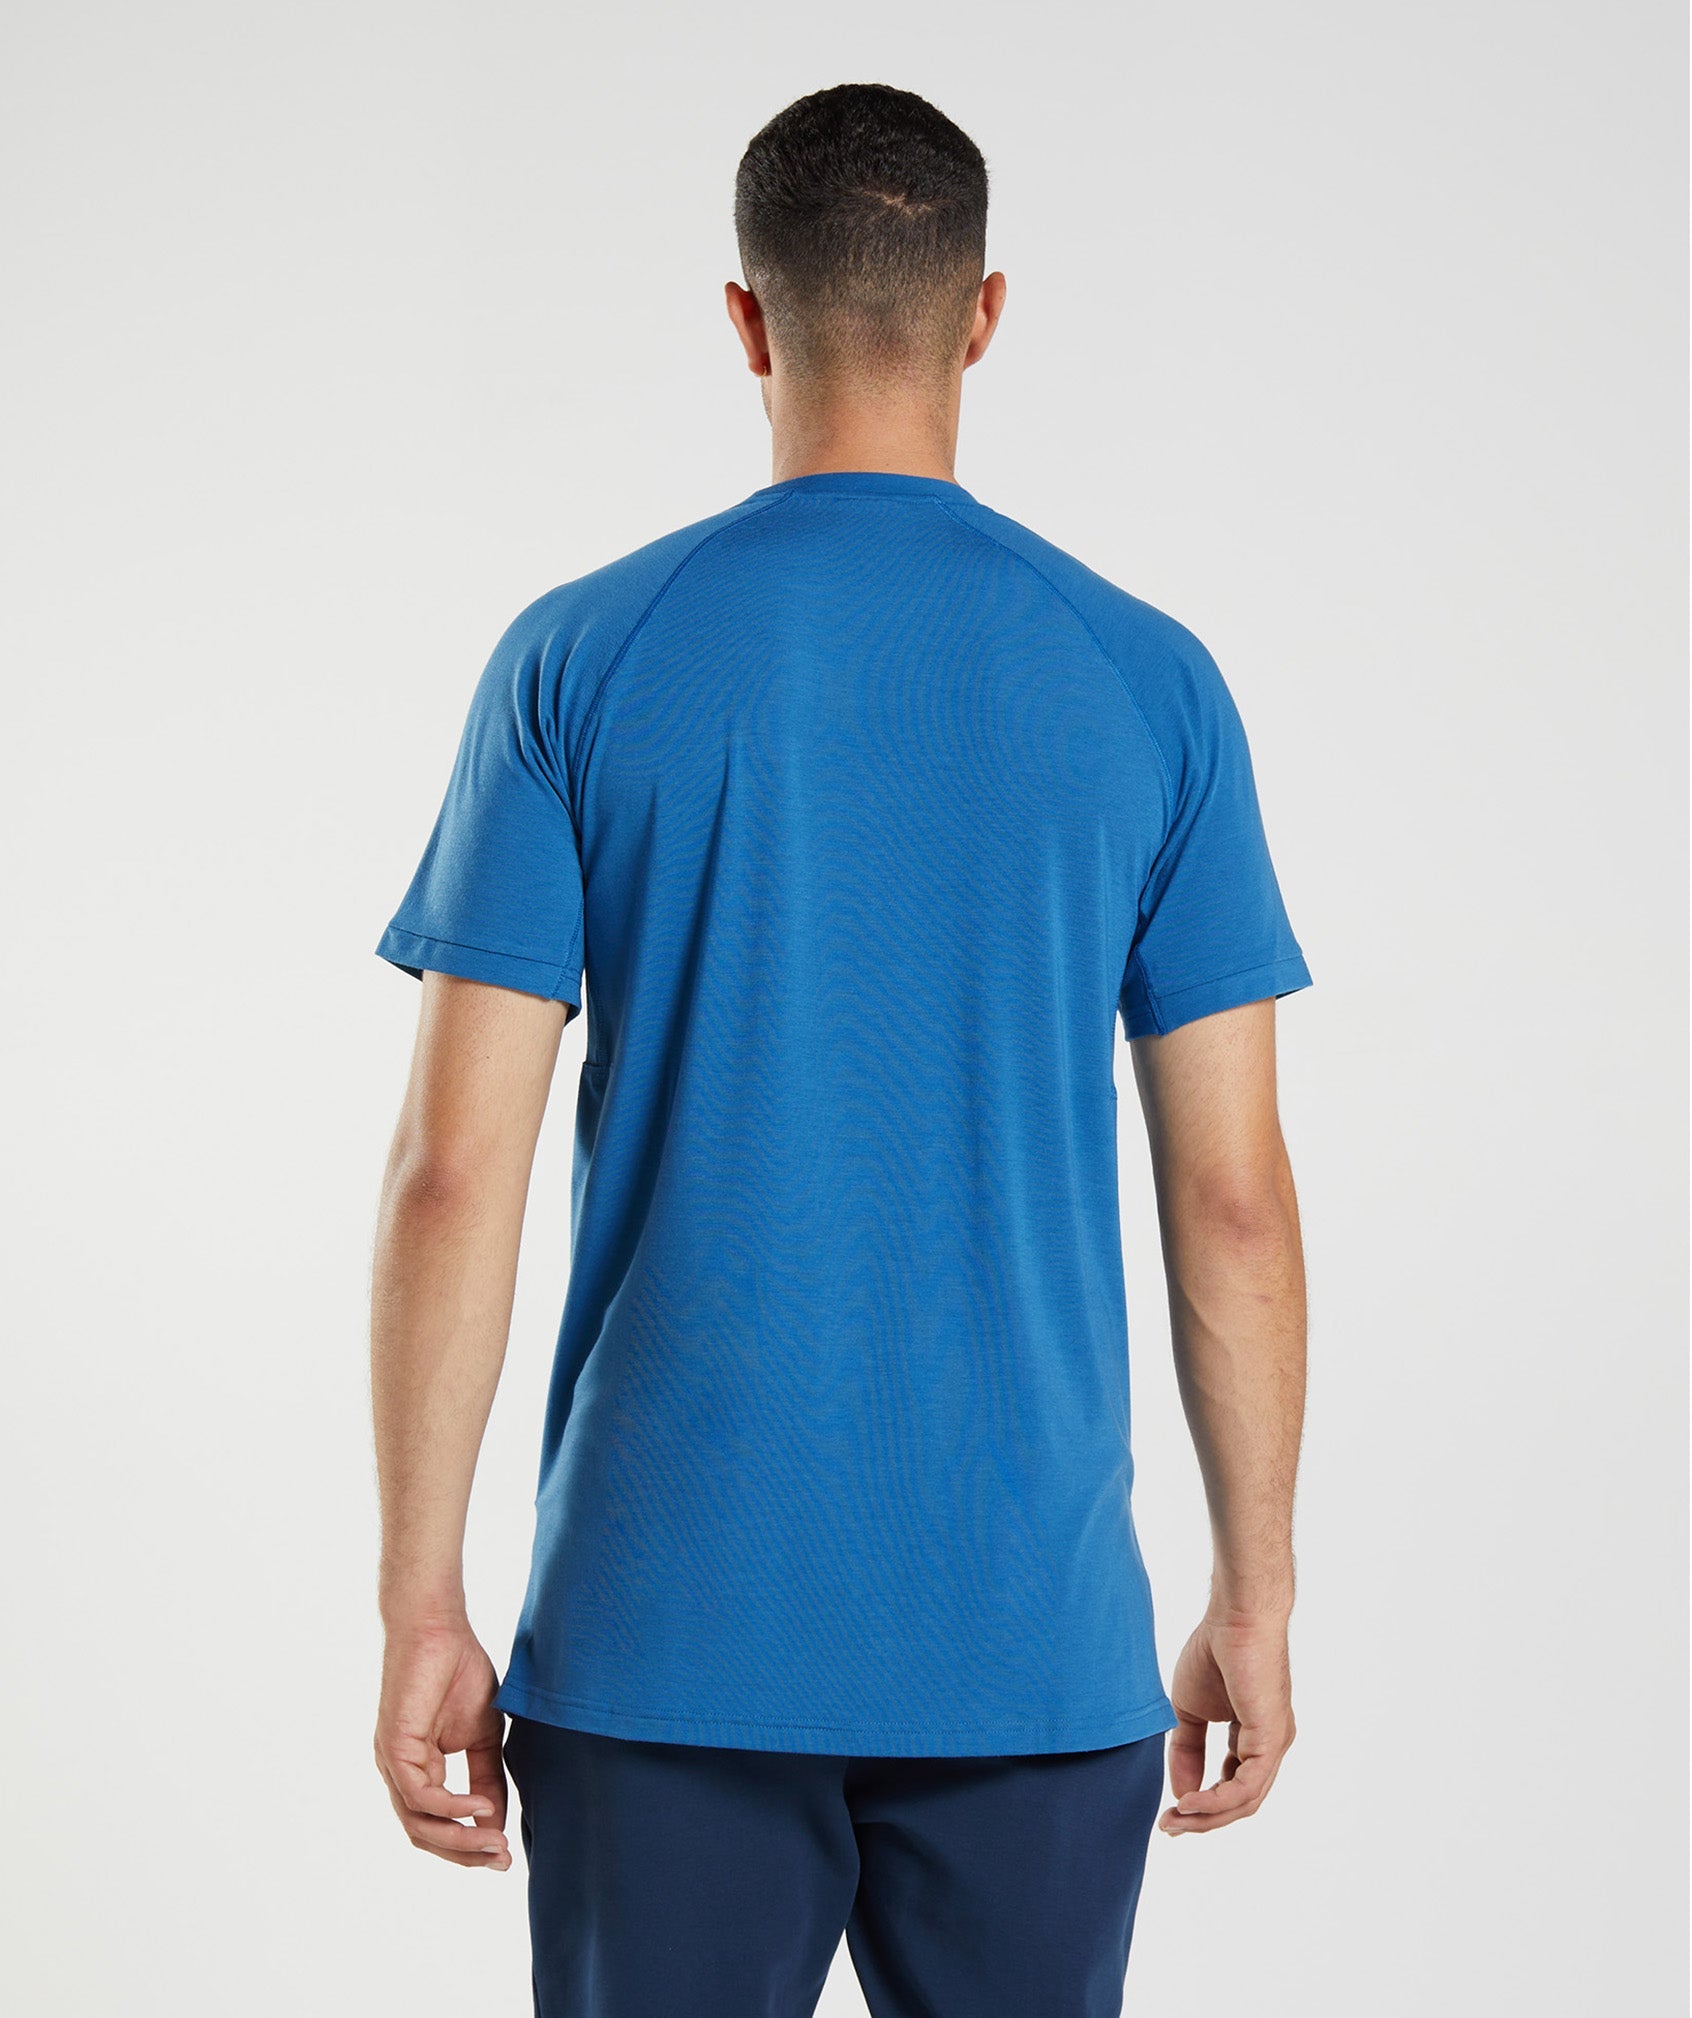 Studio T-Shirt in Lakeside Blue - view 2